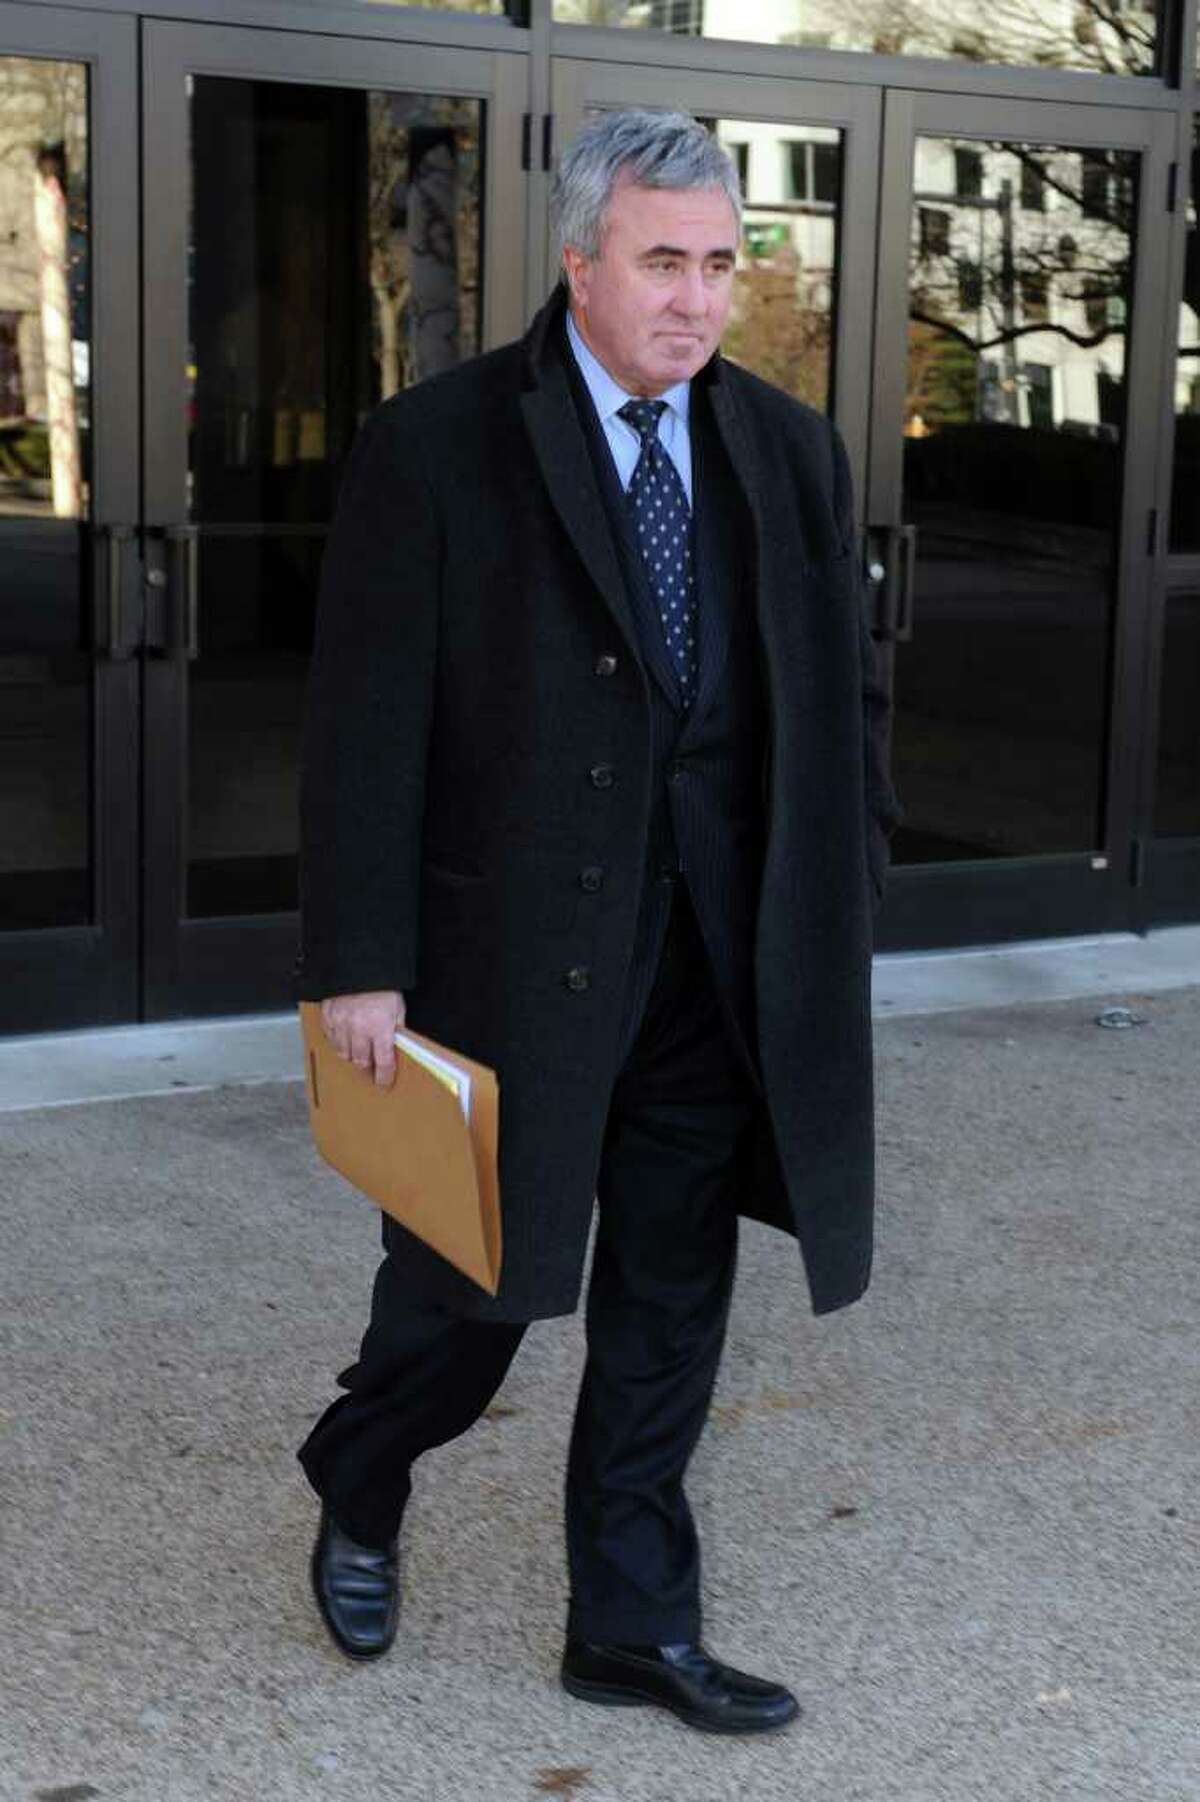 Attorney Michael "Mickey" Sherman leaves U.S. District Court in Bridgeport, Conn. Dec. 22nd, 2010. Sherman was sentenced to a year and a day in prison for failing to pay income tax. He is scheduled to report to prison in March.